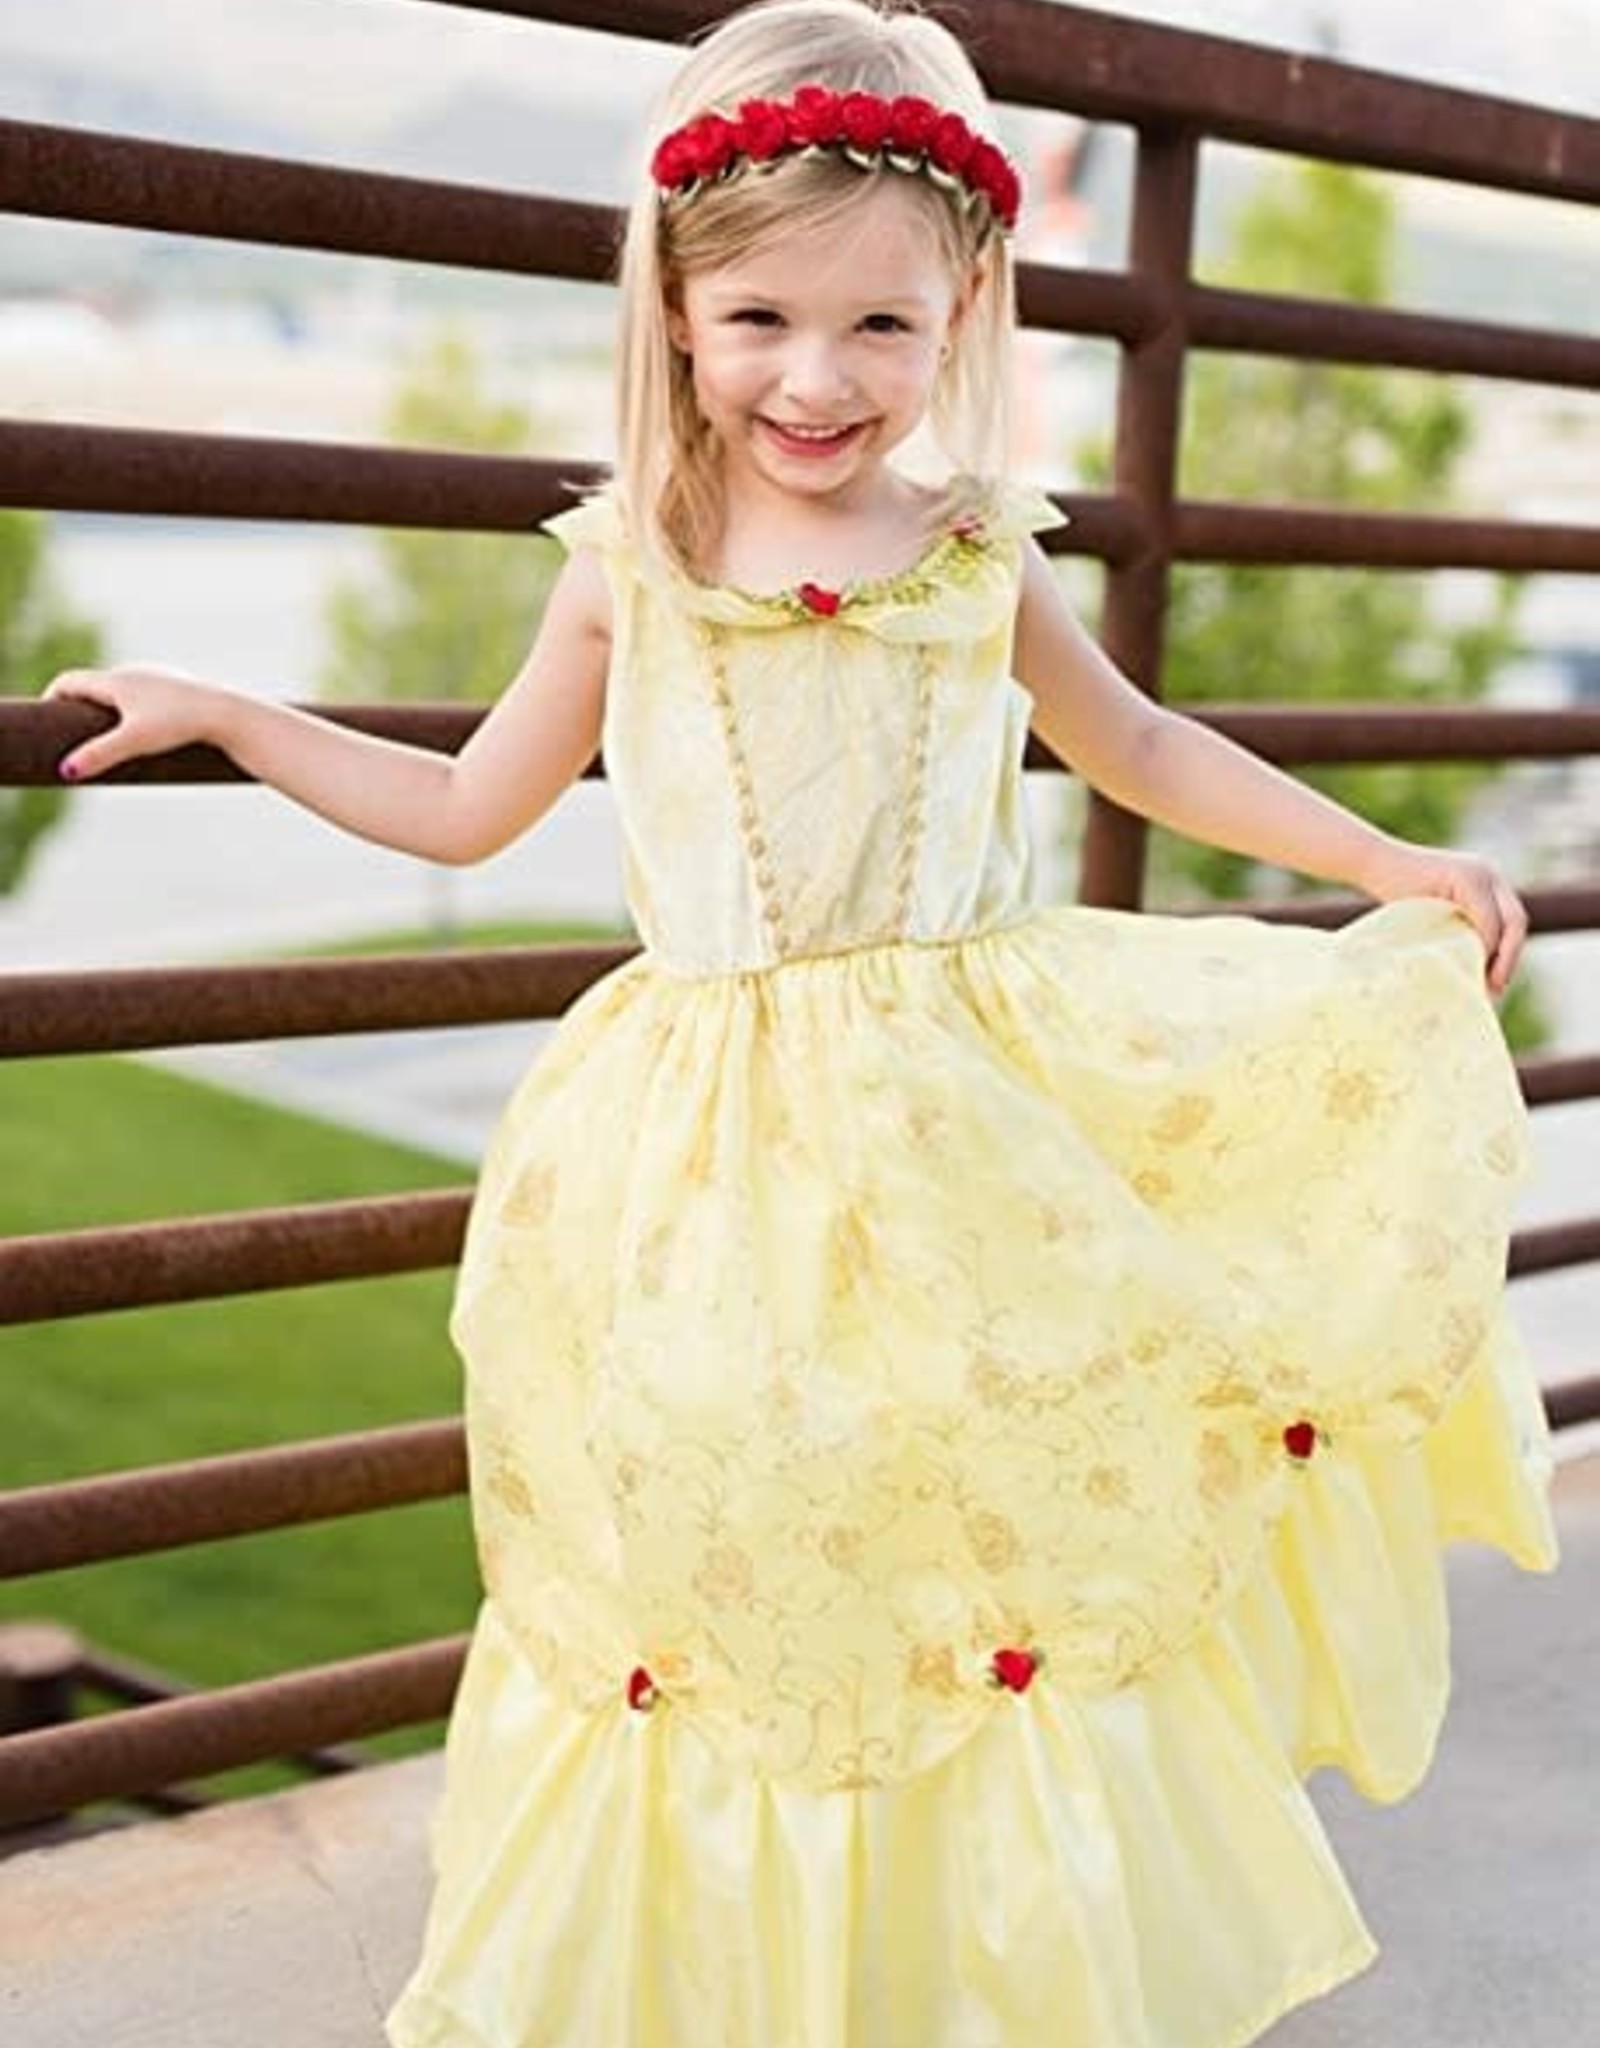 Little Adventures Yellow Beauty (Pg.3)3-5 YRS (M)